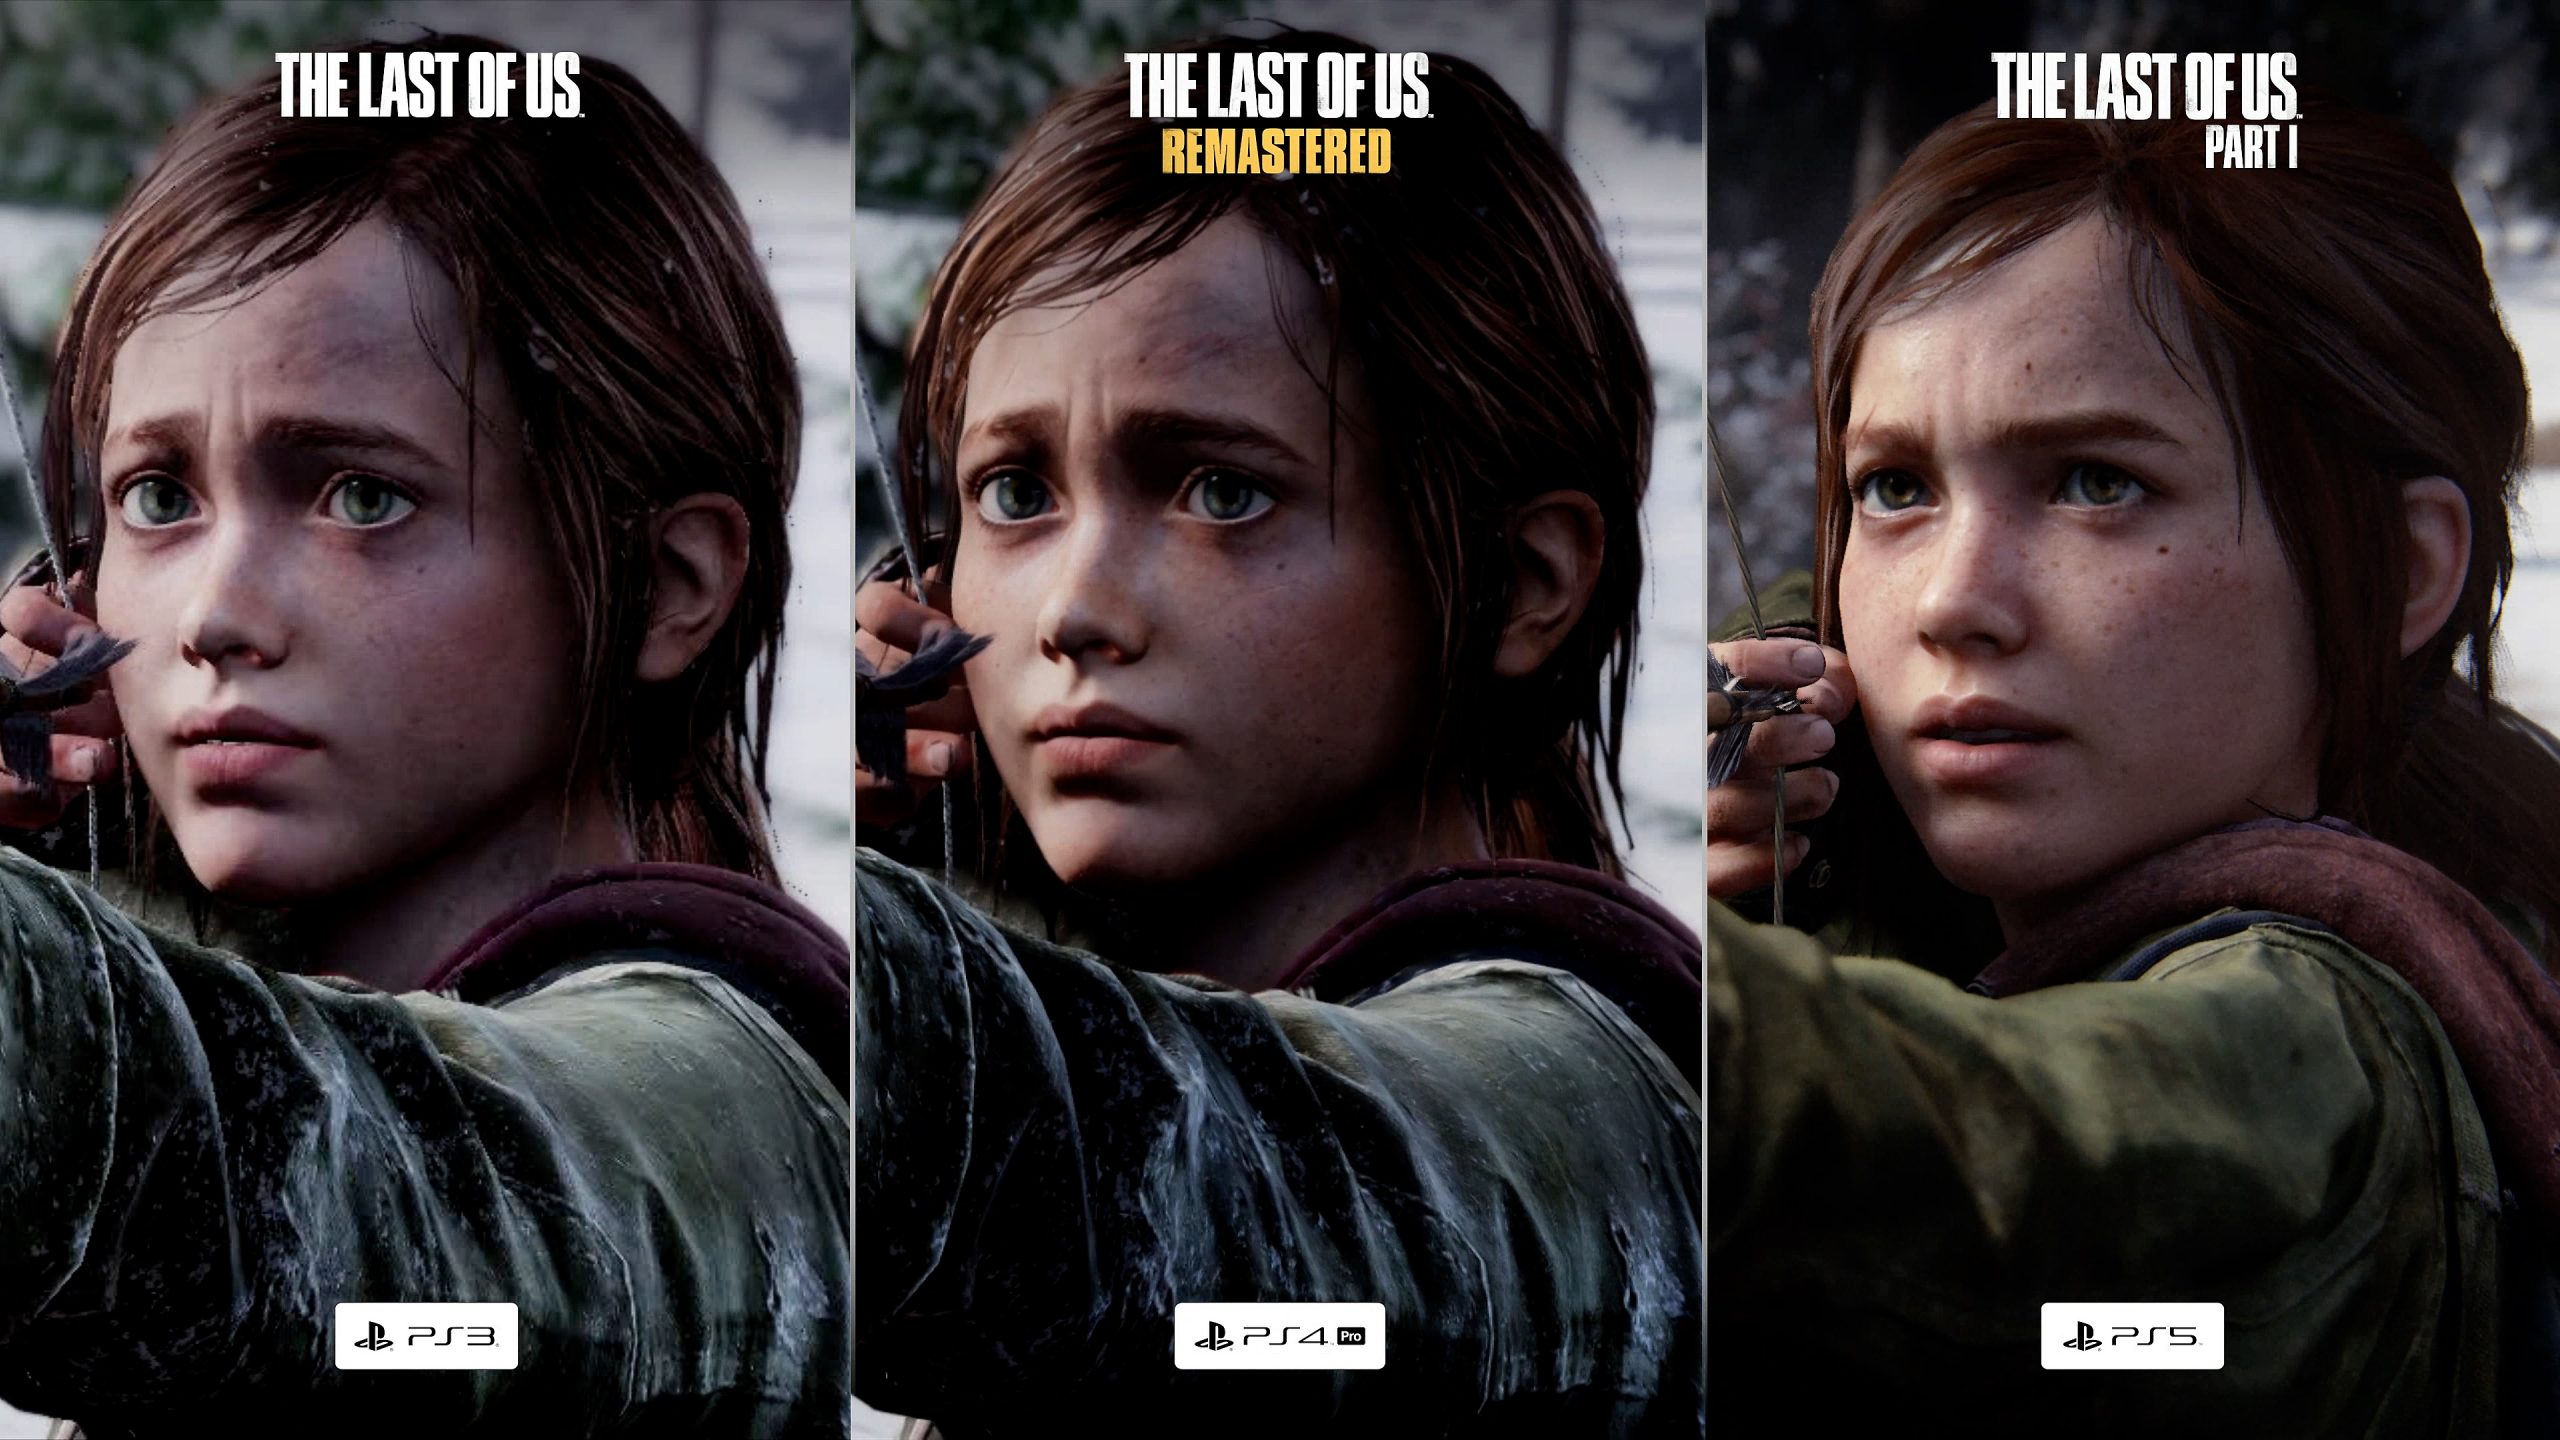 The Last of Us Part 1: Remake